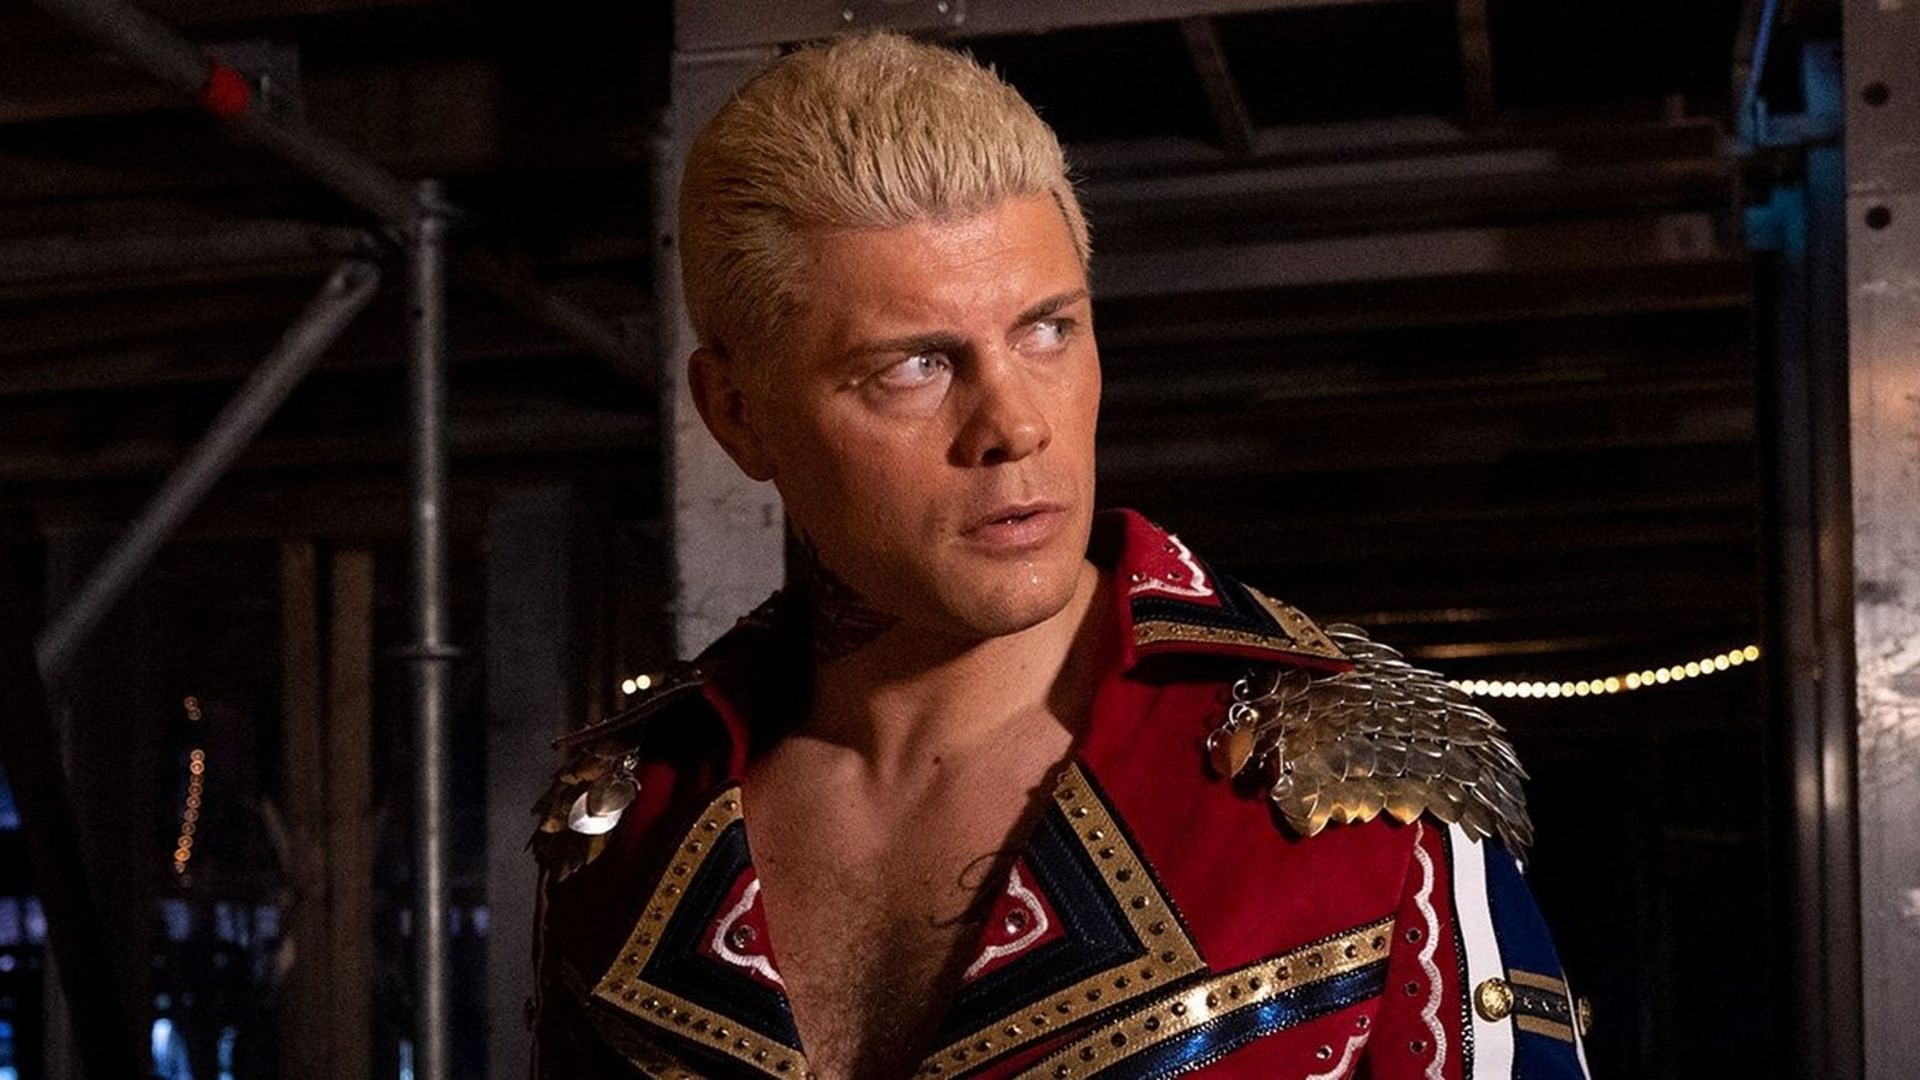 Cody Rhodes will compete in the men